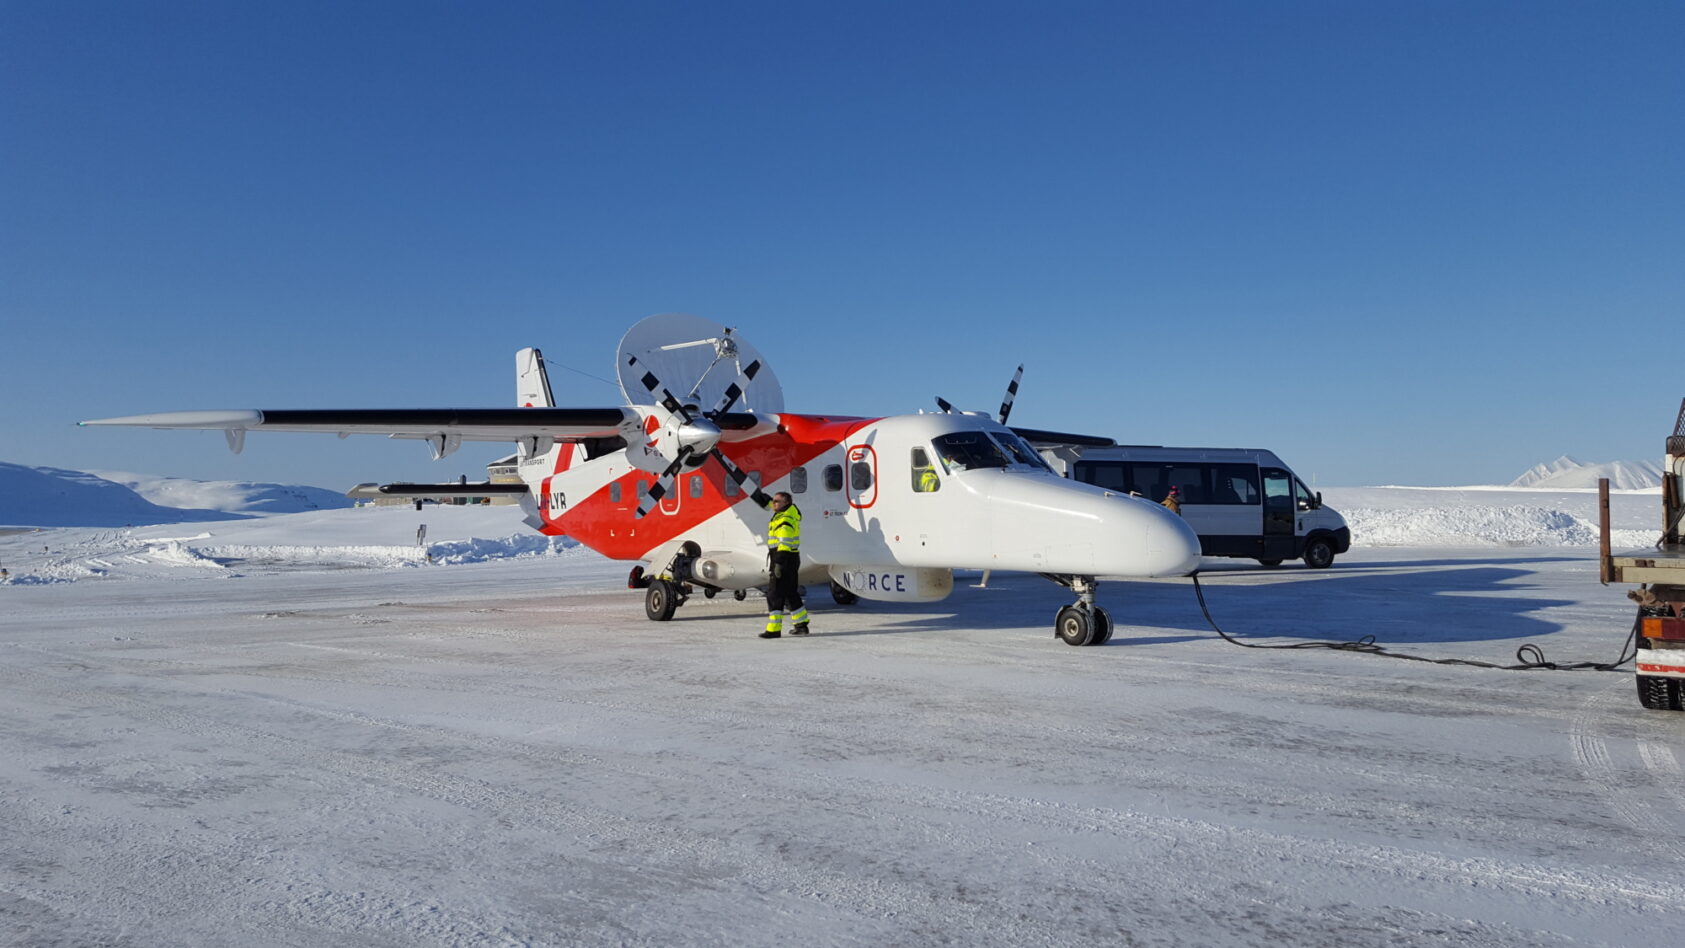 , The Lufttransport Dornier aircraft, stationed in Longyearbyen, is the world's first passenger aircraft with high-resolution sensors and advanced communication equipment that is usually only found on satellites., 20200407 155553, , 